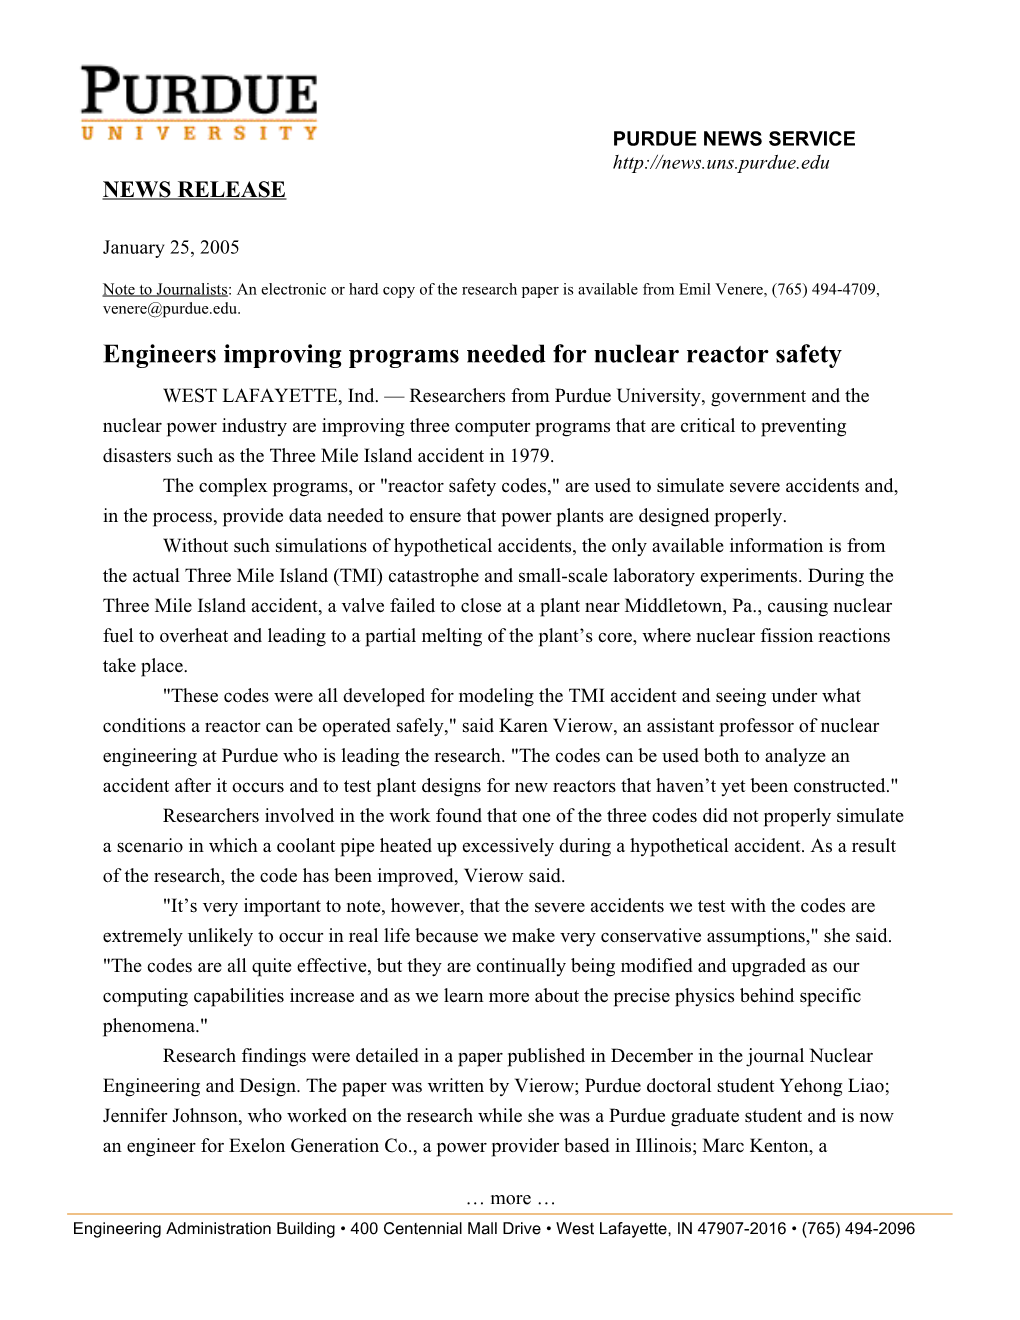 Engineers Improving Programs Needed for Nuclear Reactor Safety